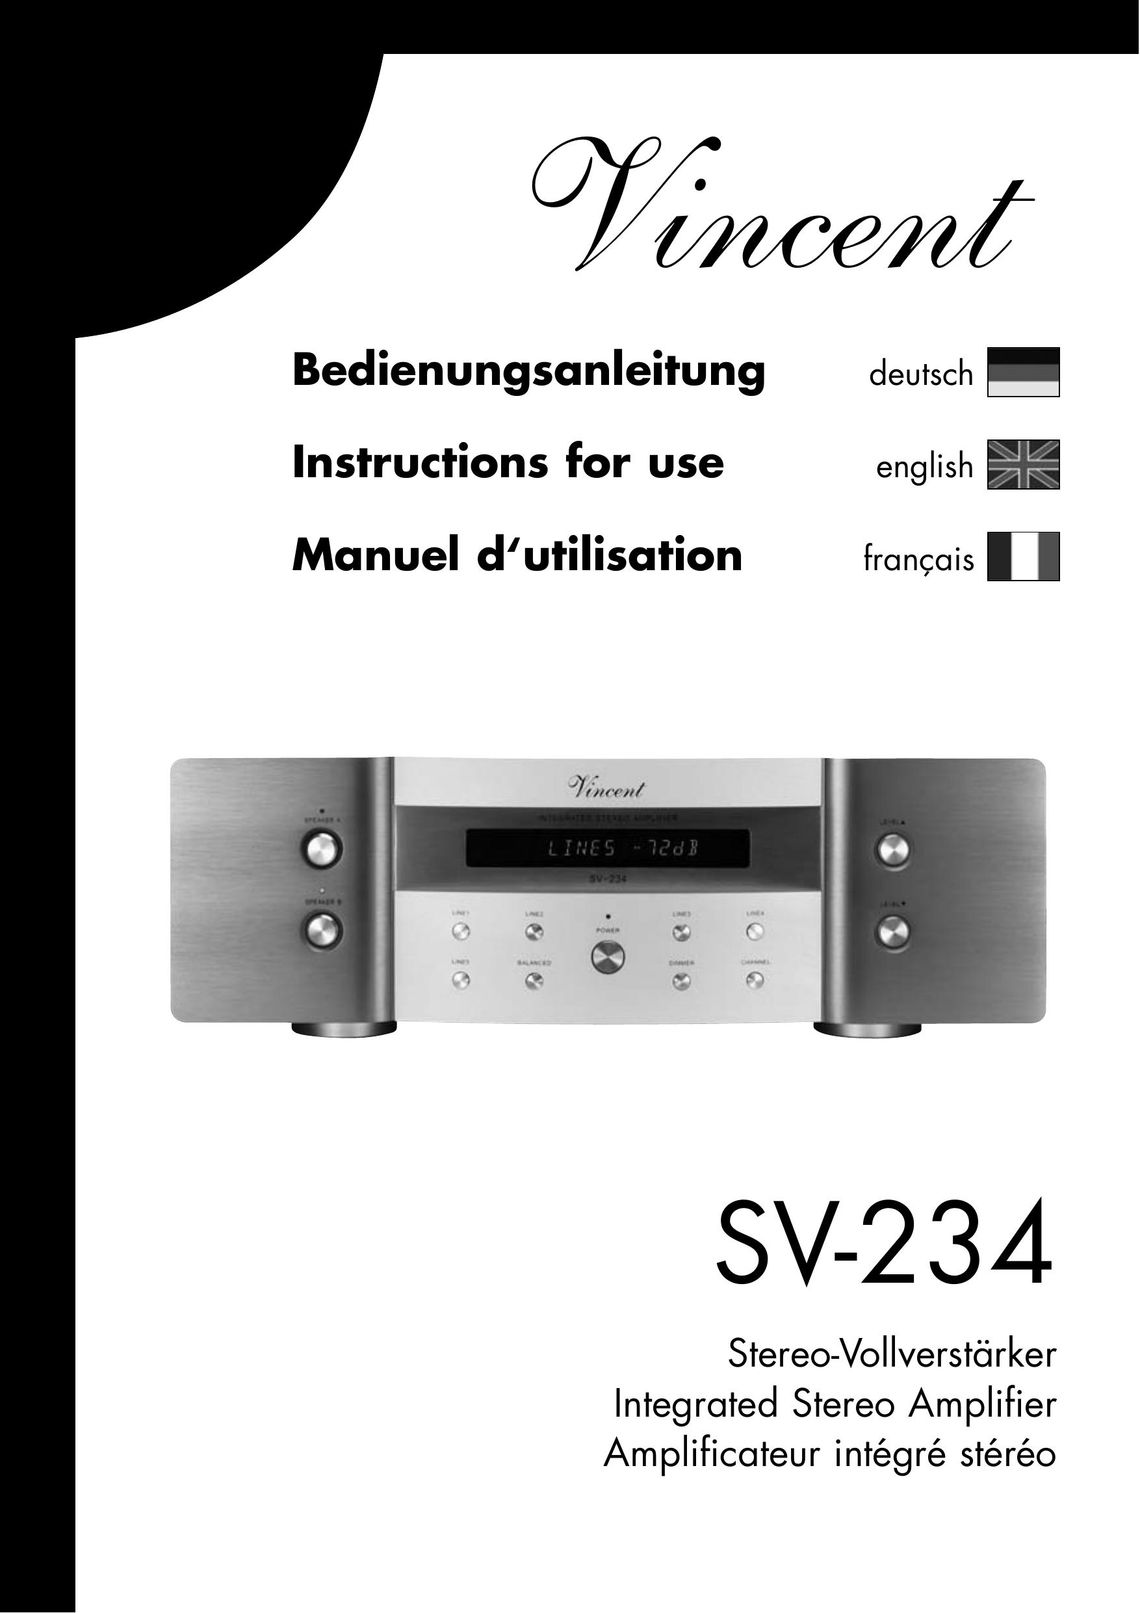 Vincent Audio SV-234 Stereo Amplifier User Manual